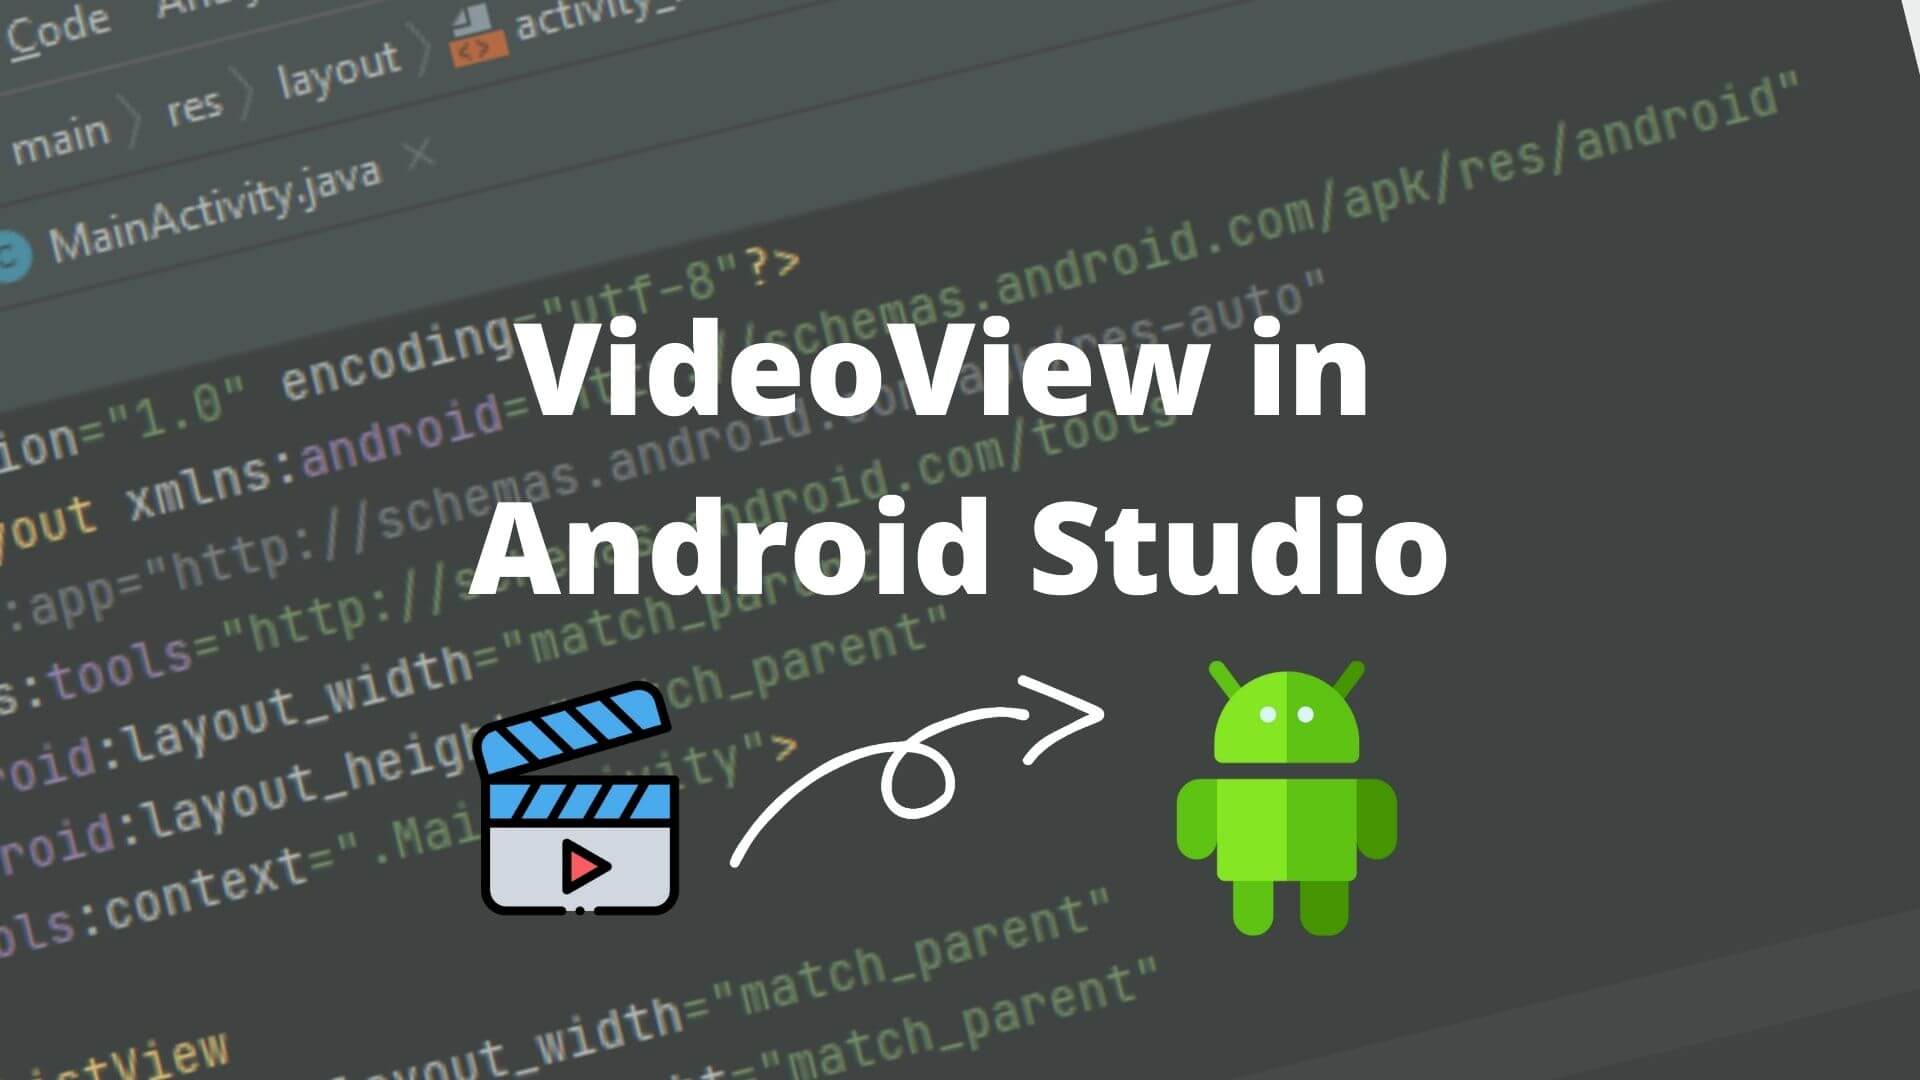 VideoView in Android Studio